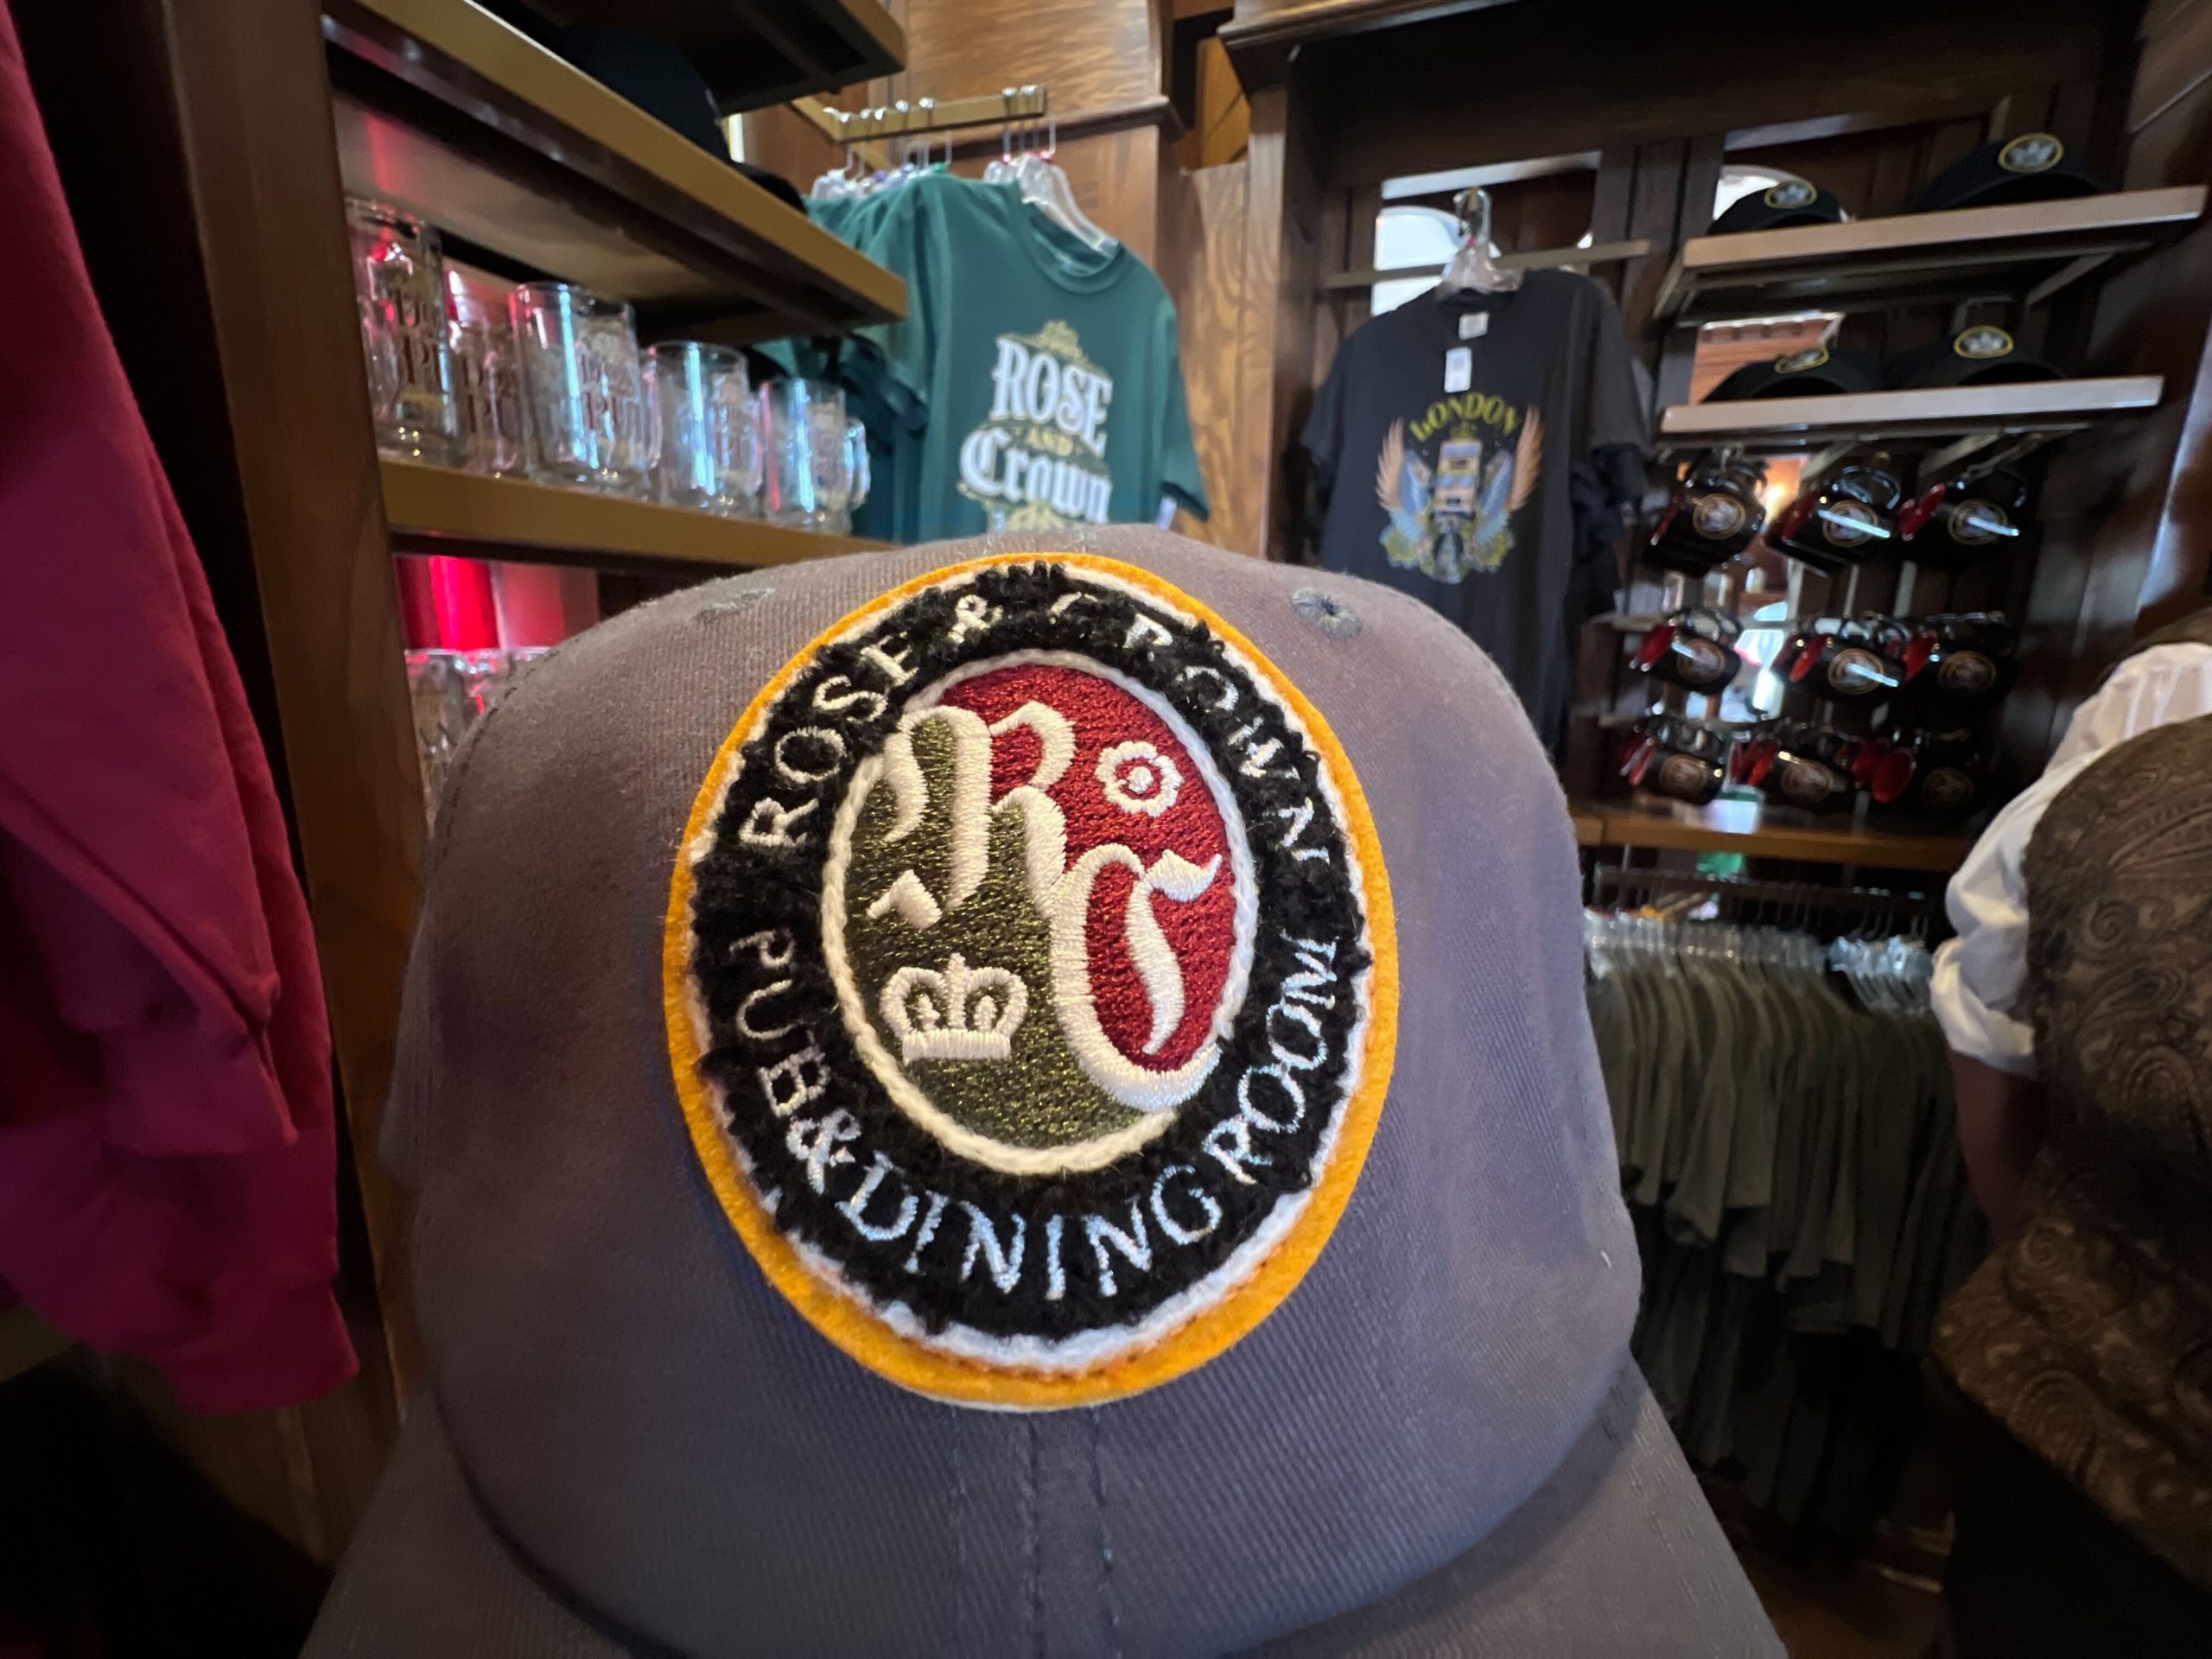 rose and crown uk merchandise